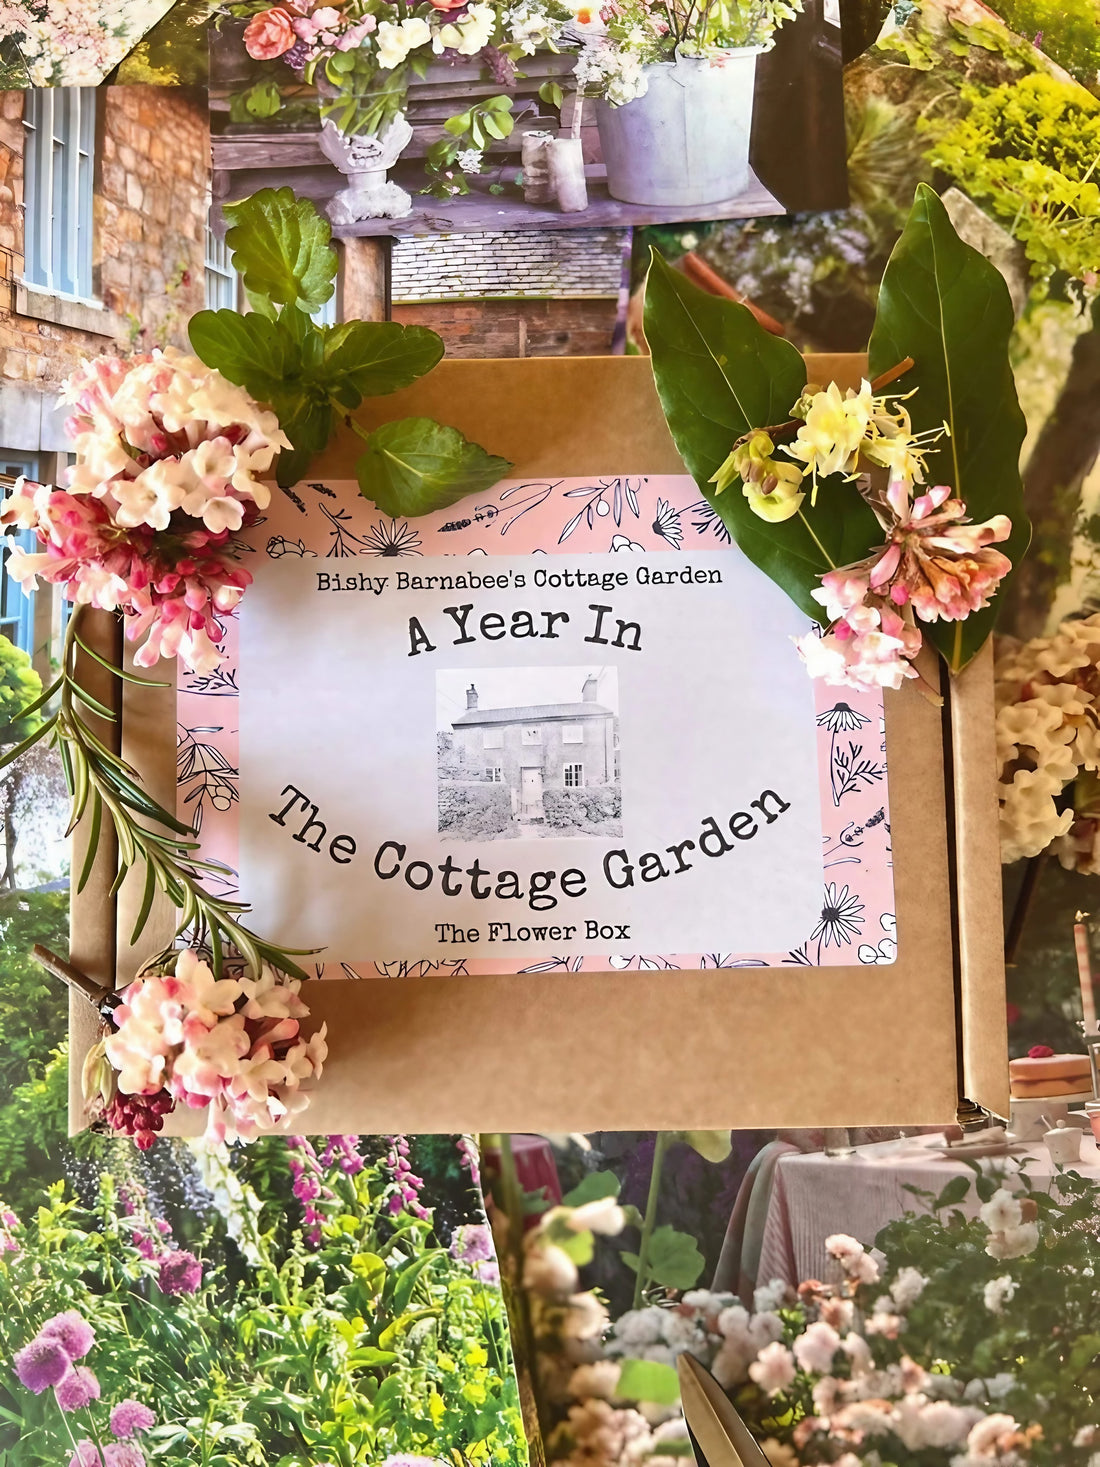 Cover image of &quot;A Year in the Cottage Garden&quot; book depicting a quaint garden scene